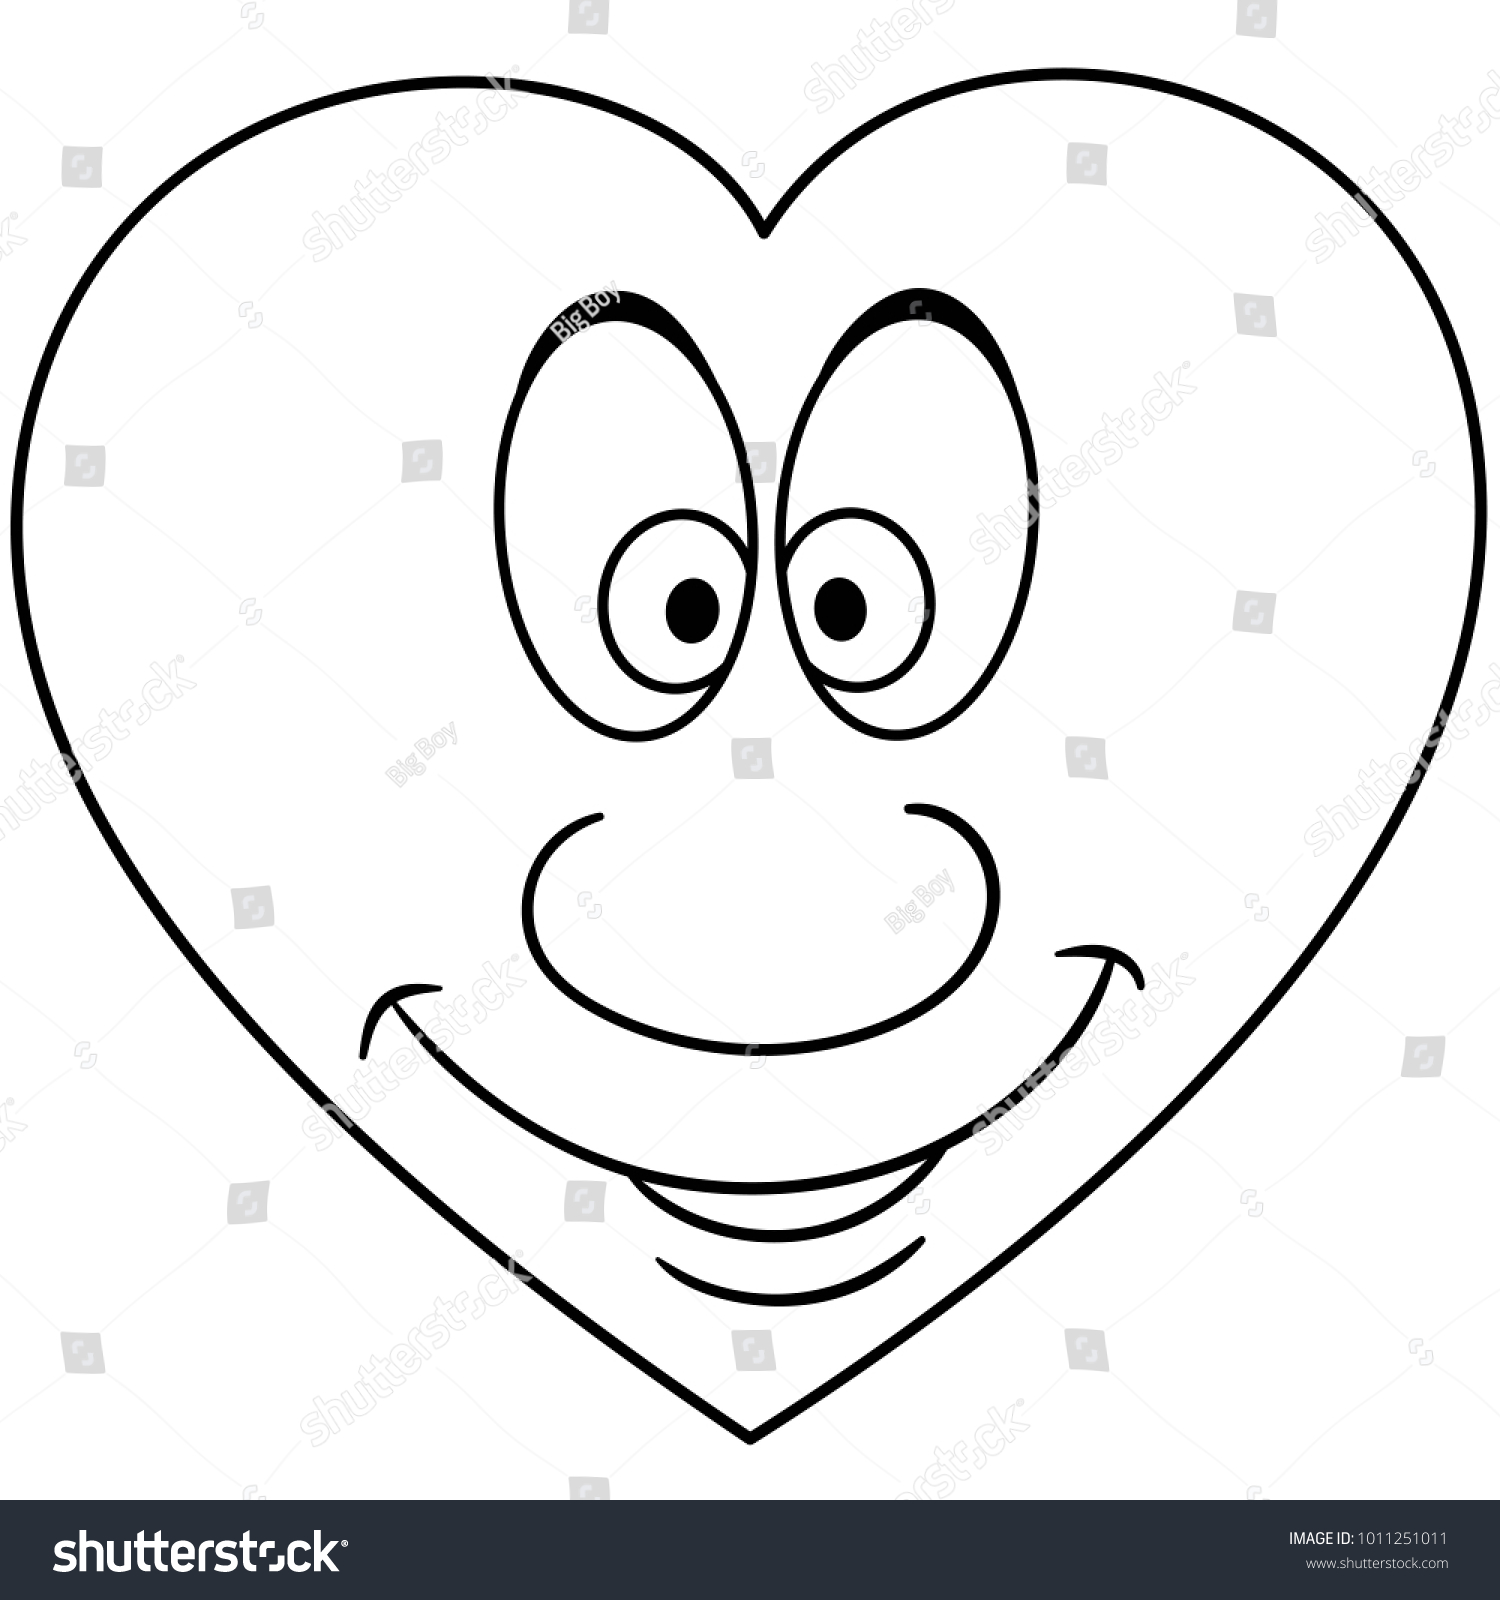 Coloring page coloring book cartoon heart stock vector royalty free